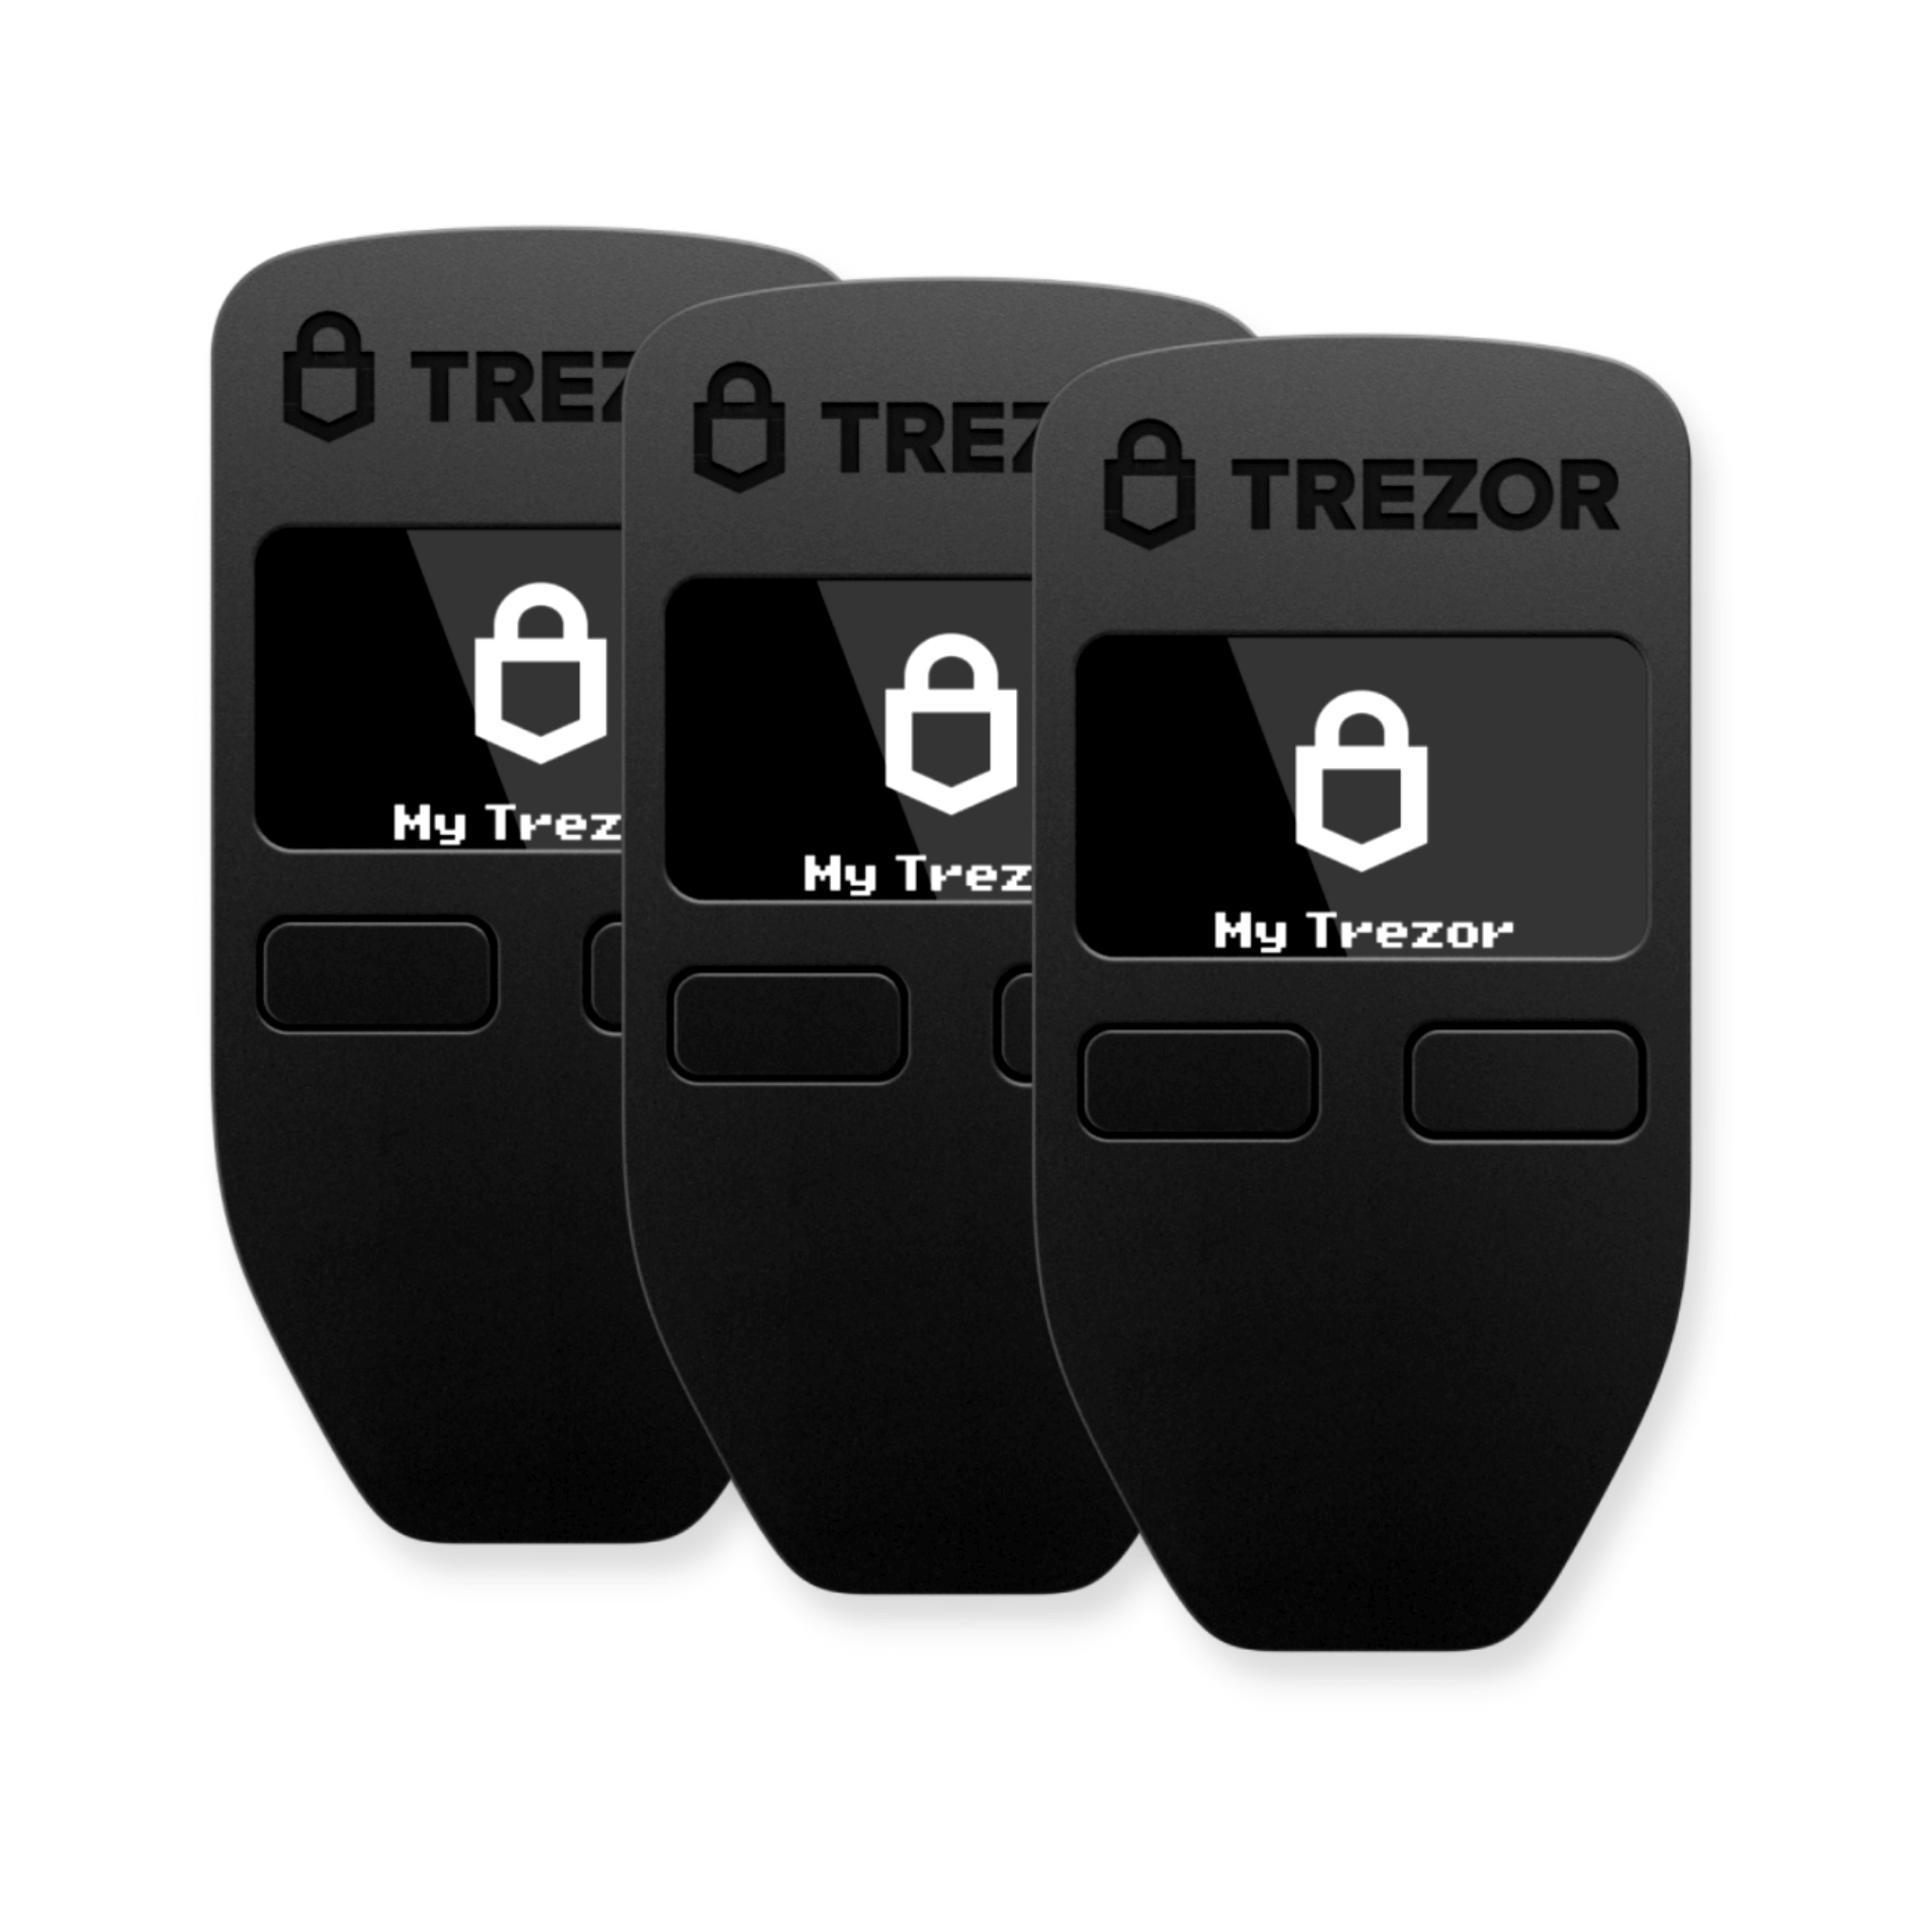 Trezor Model One Pack of 3 Cryptocurrency Hardware Wallets